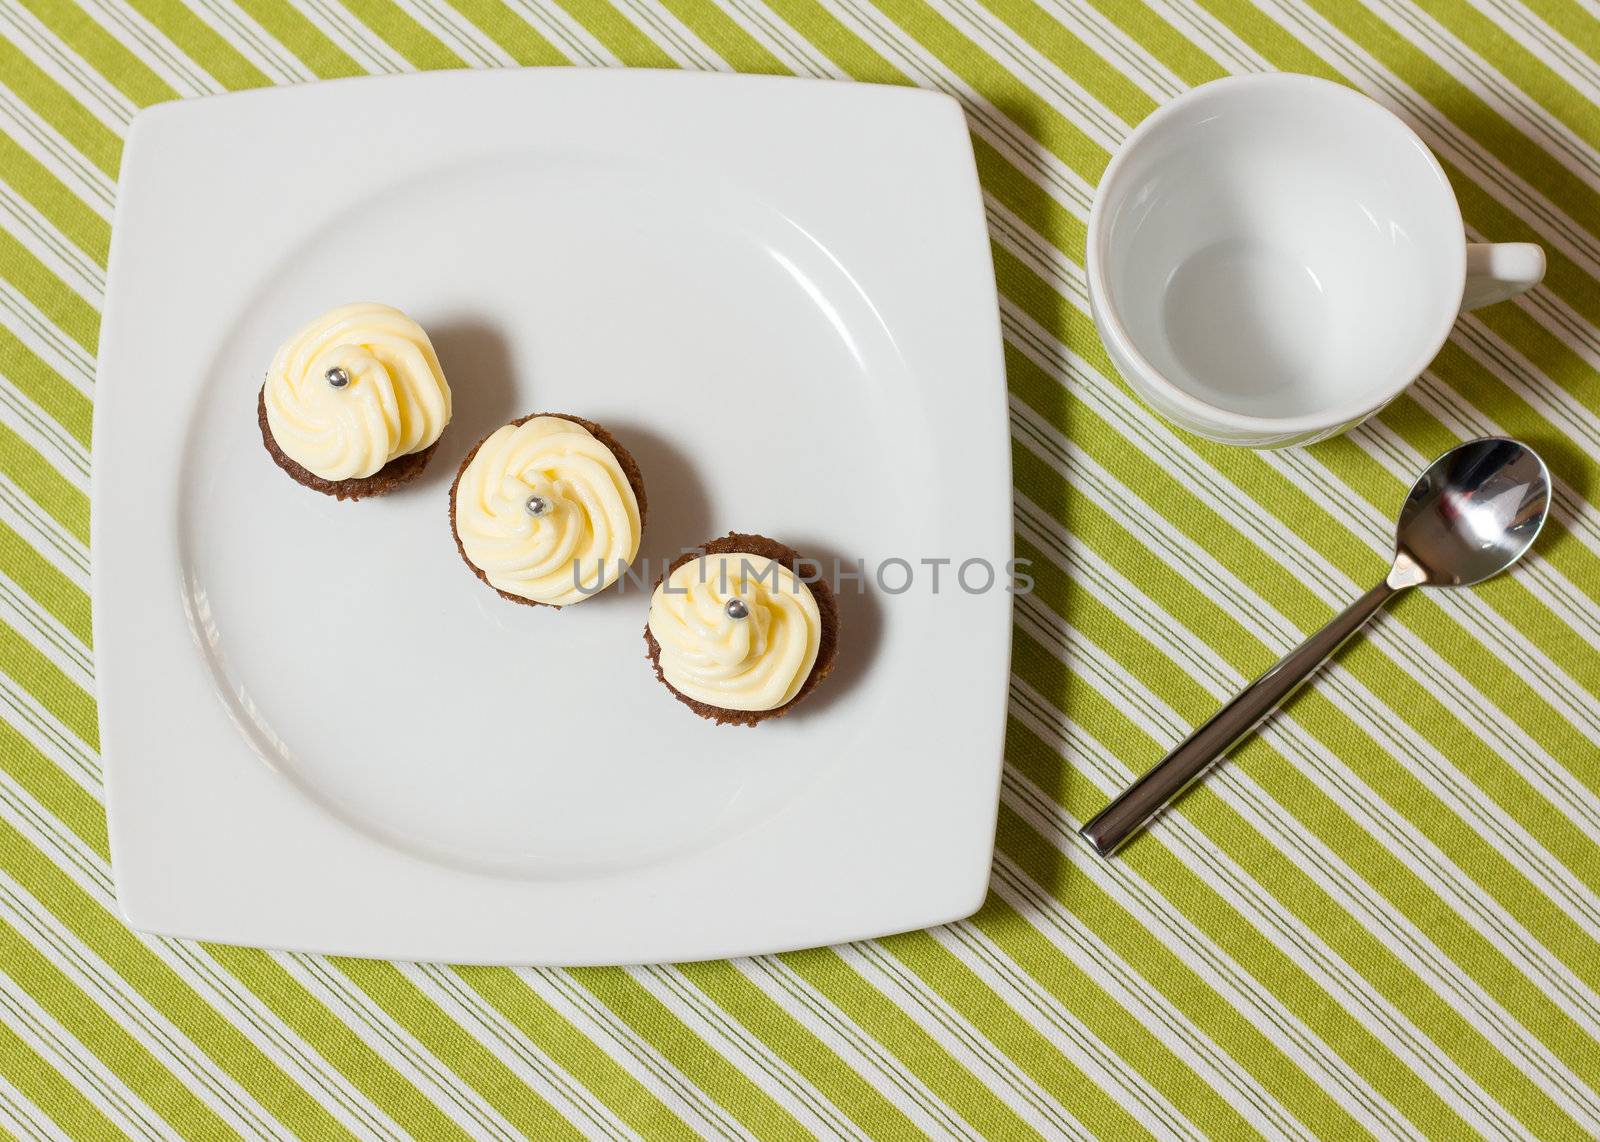 Three chocolate cupcakes with silver sprinkles on top, on white plate and fabric tablecloth with stripes